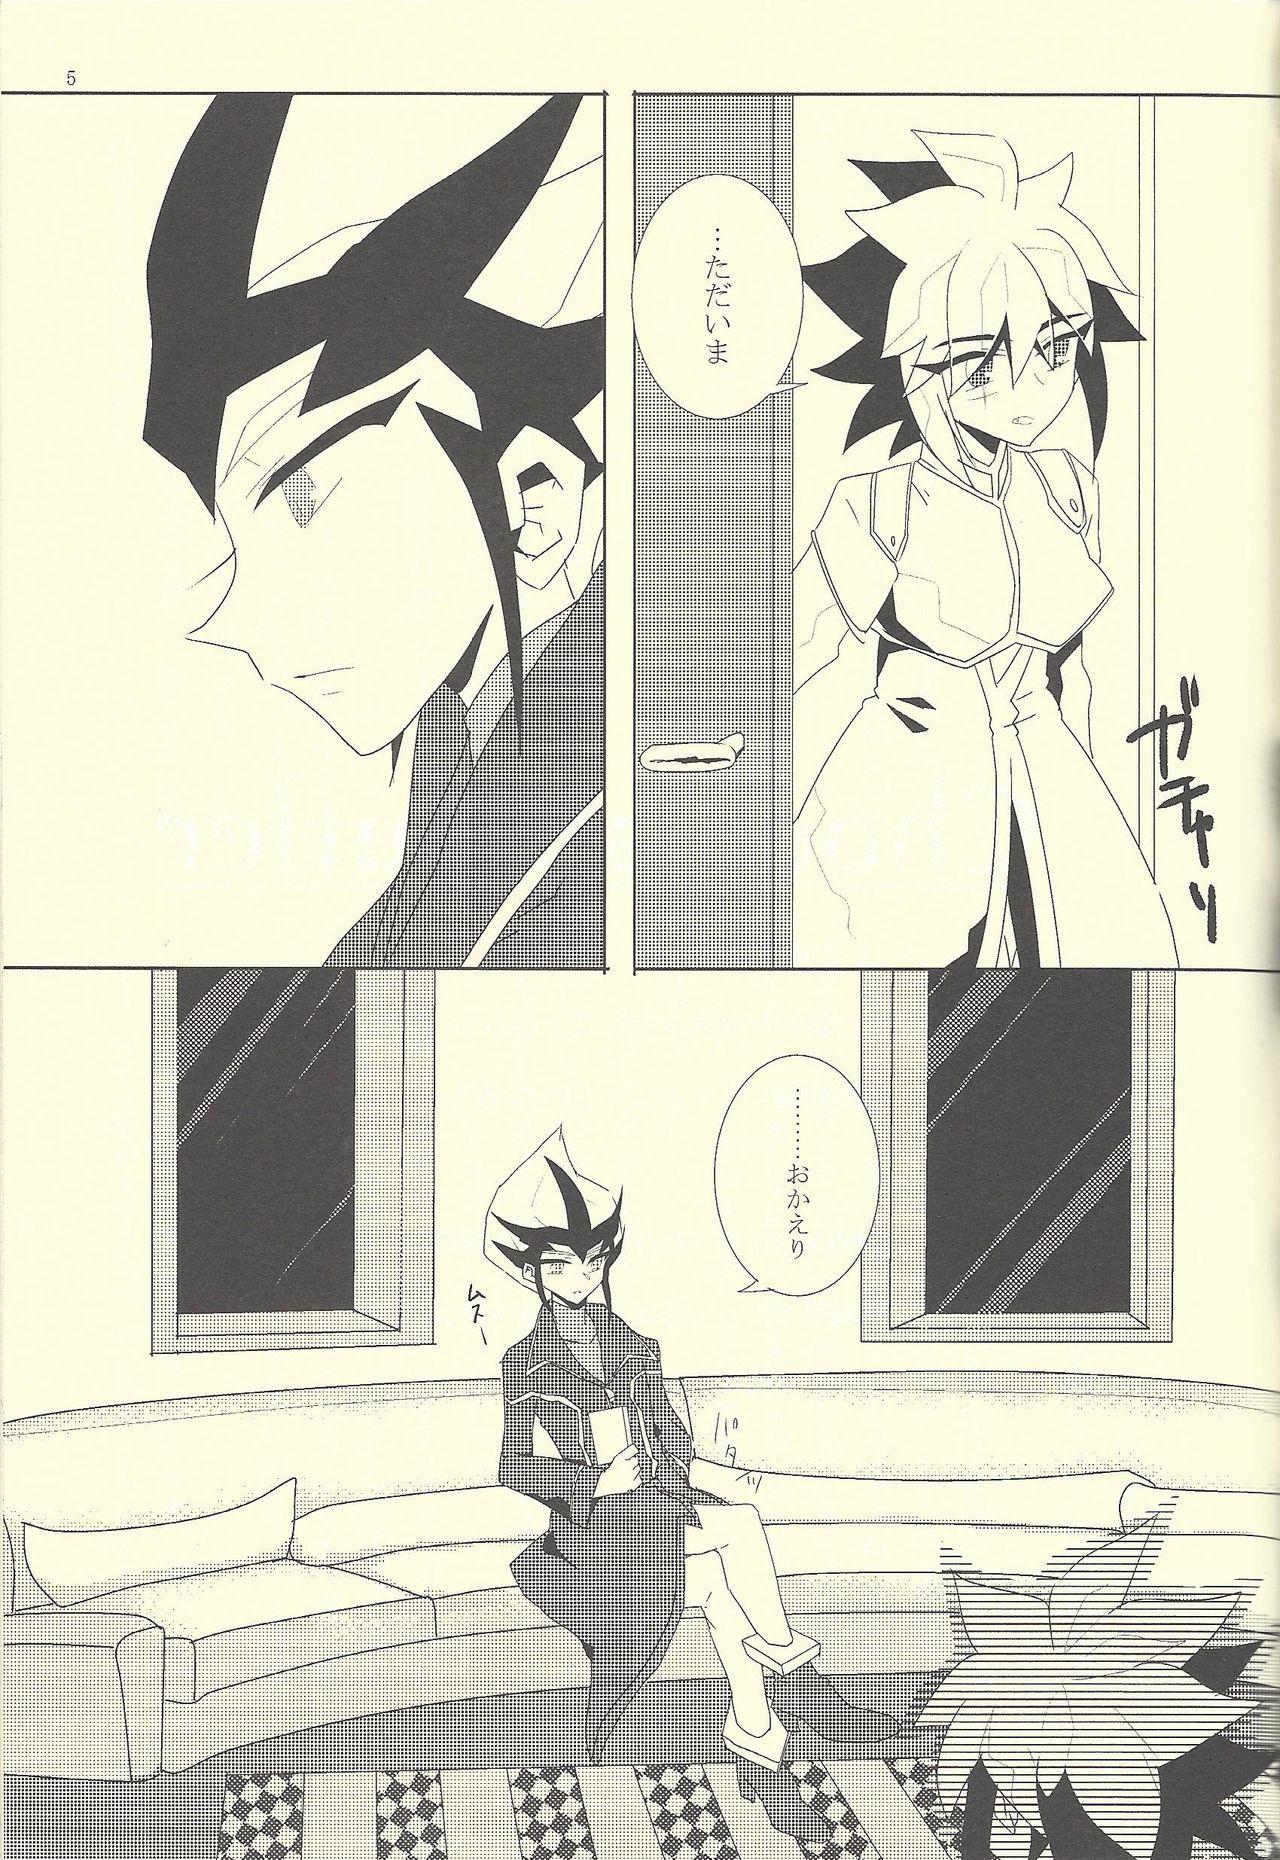 Boobies Chocolate Butler - Yu gi oh zexal Old And Young - Page 4